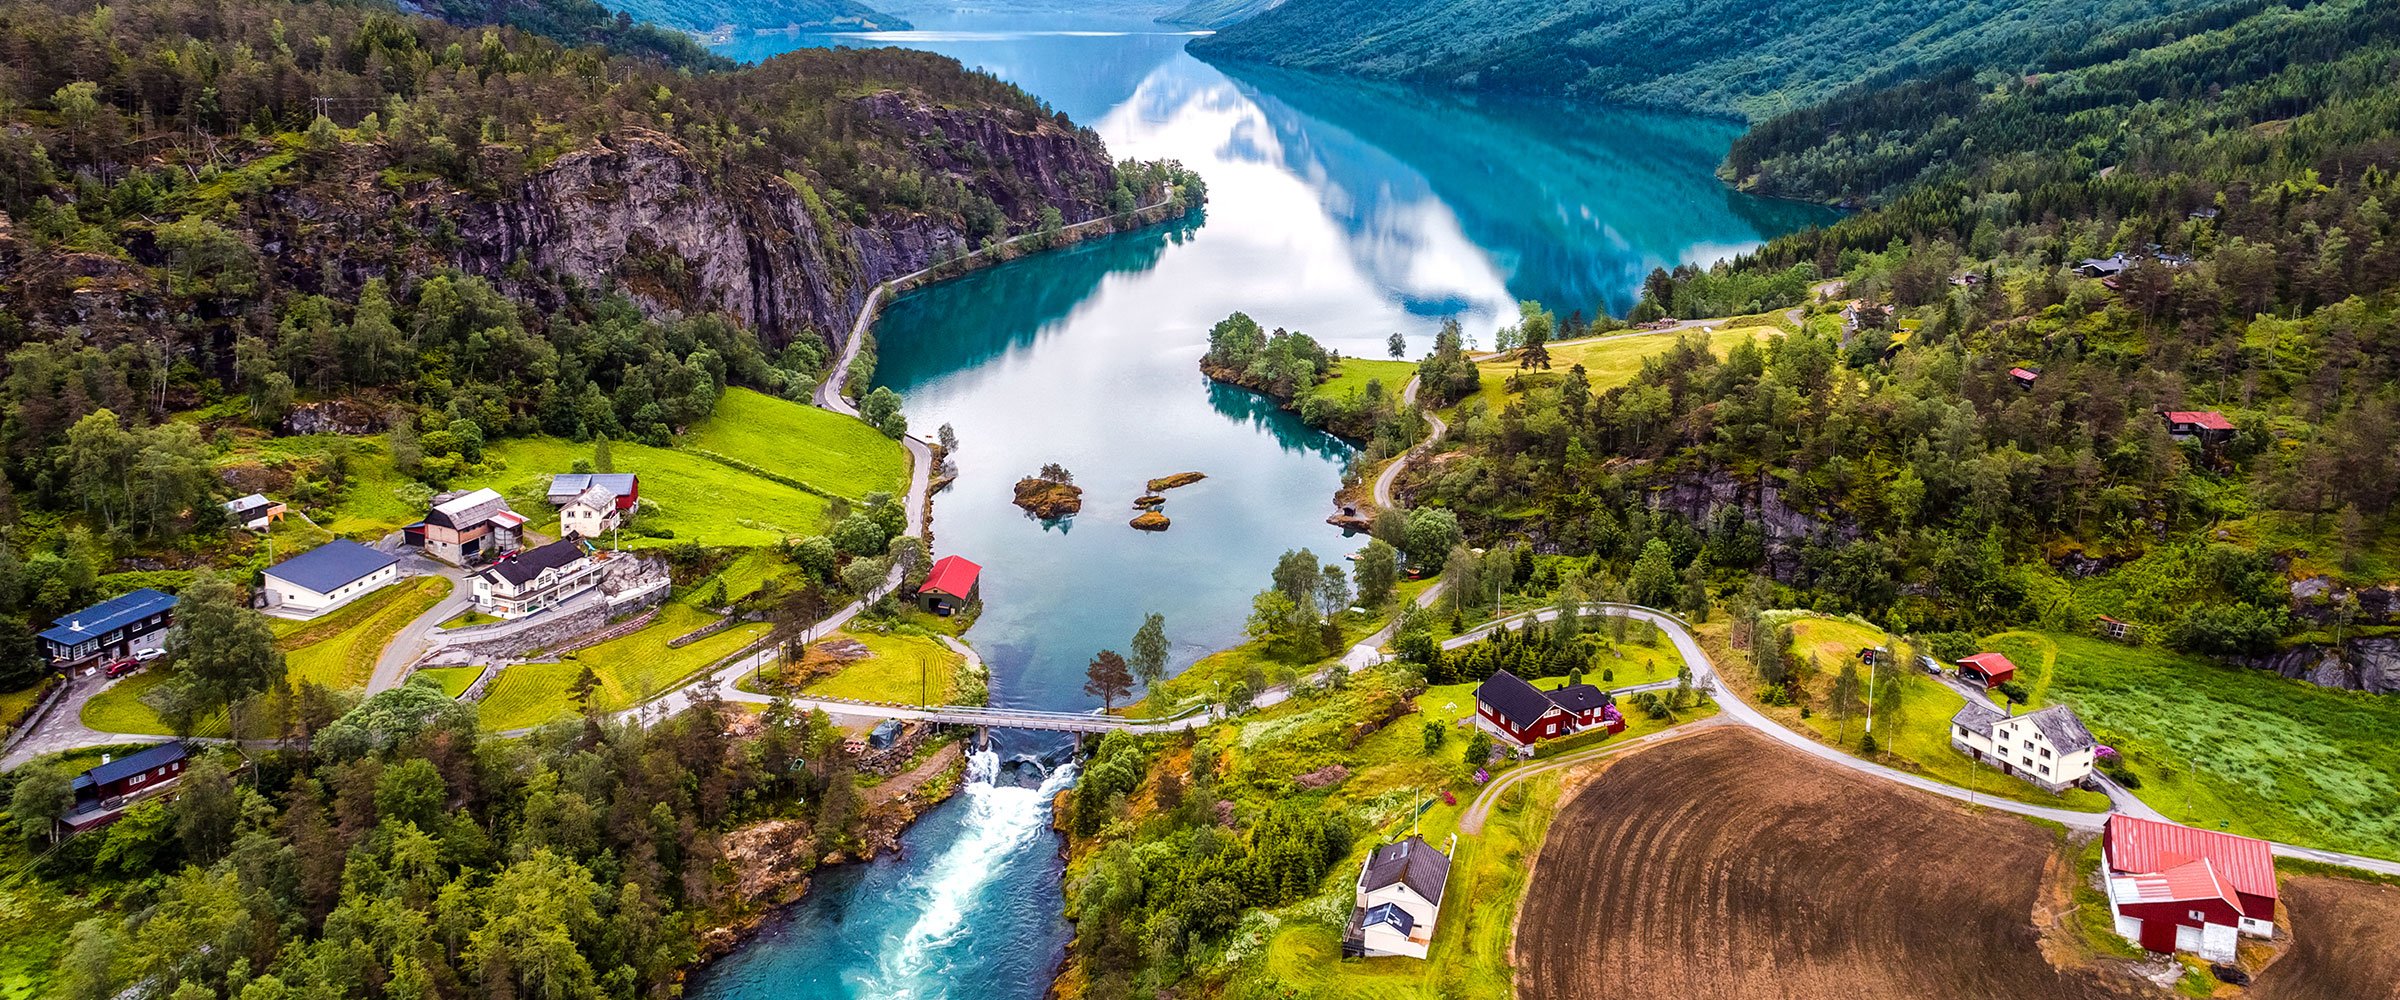 beautiful-nature-norway-aerial-photography-PTKMY2L